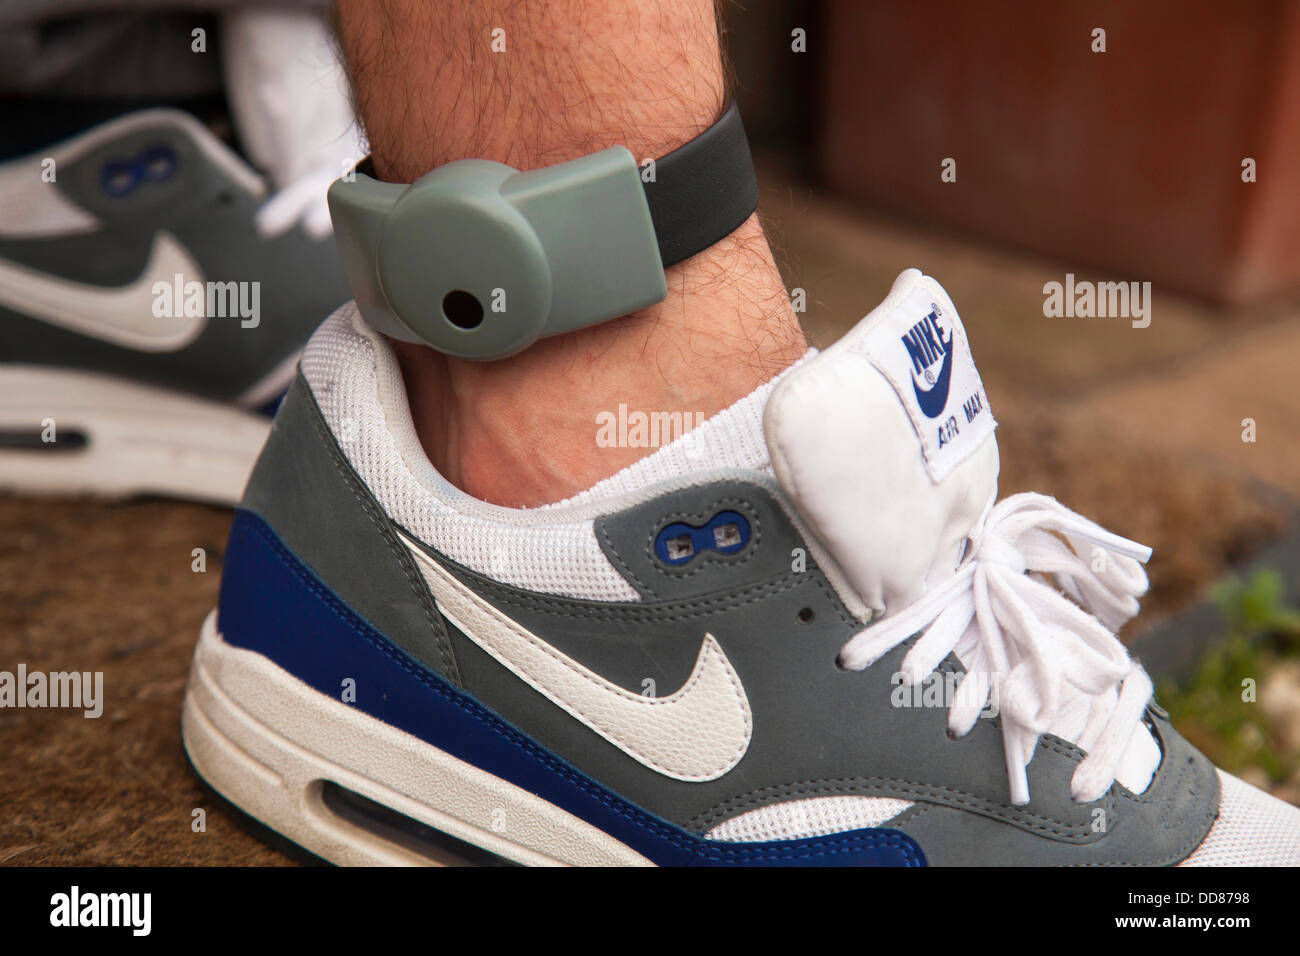 an-electronic-ankle-tag-on-a-teenage-offender-in-the-uk-identification-DD8798.jpg